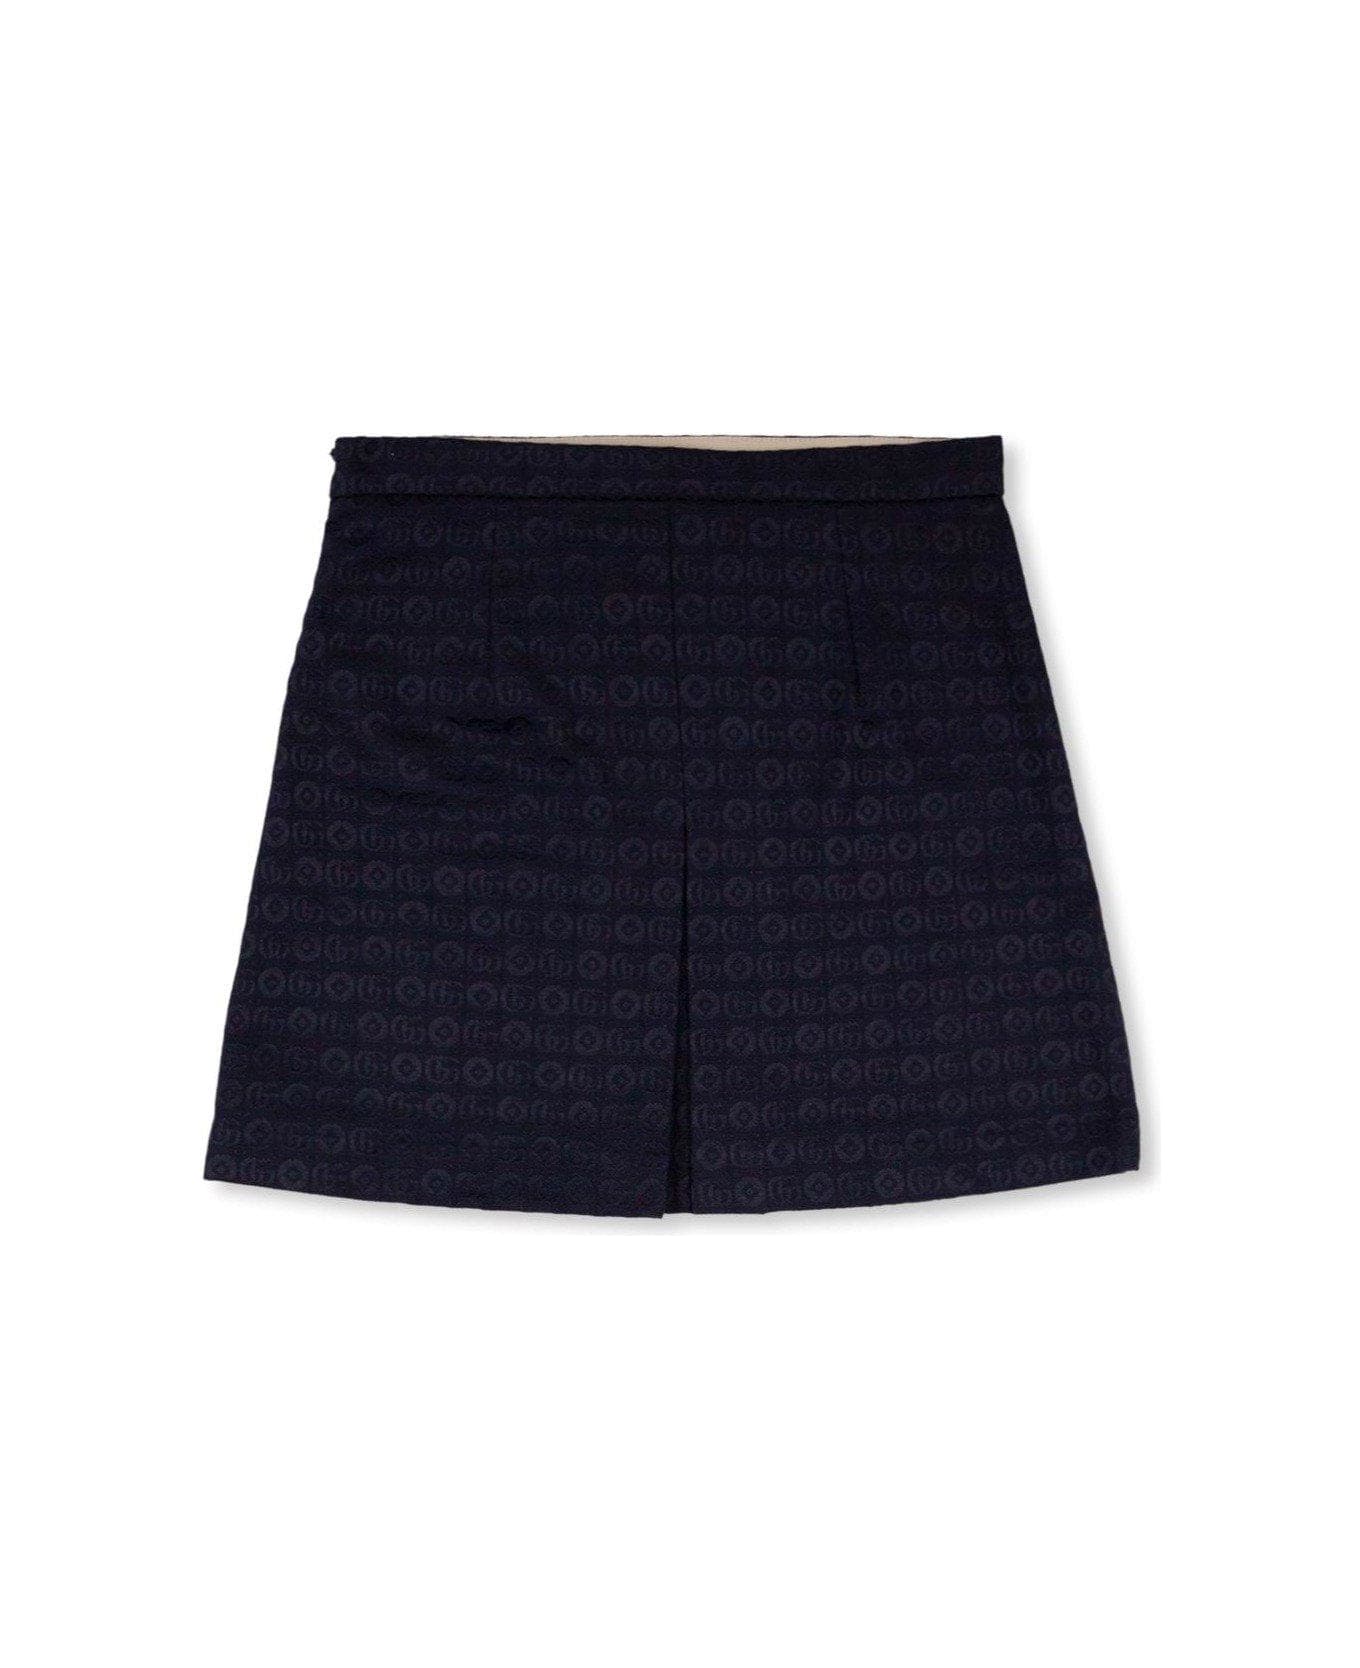 Gucci Logo Plaque Pleated Skirt ボトムス